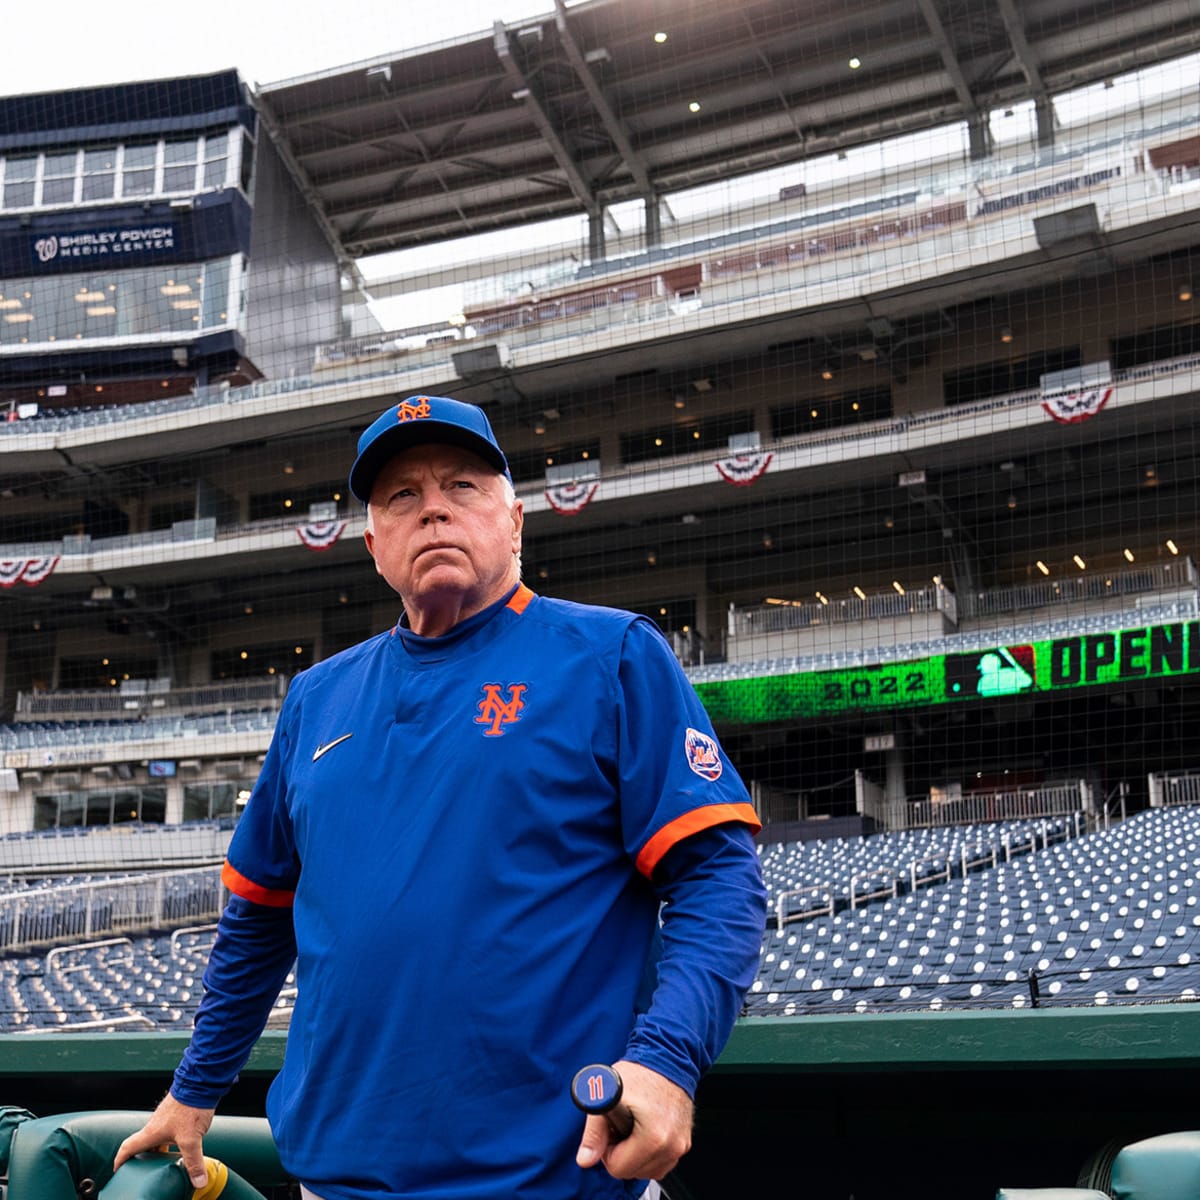 Mets players, coaches, and fans give Buck Showalter round of applause